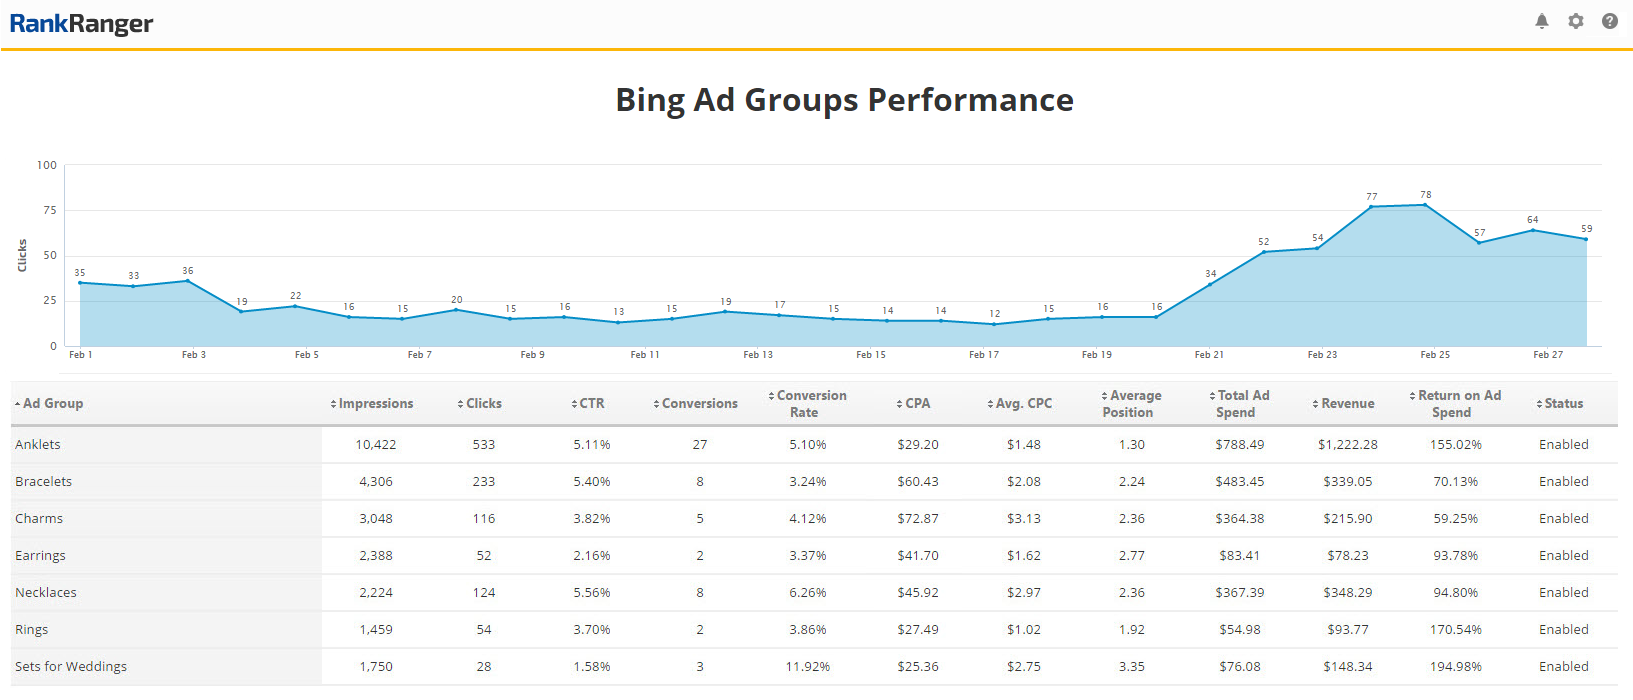 Bing Ad Groups Performance Report 